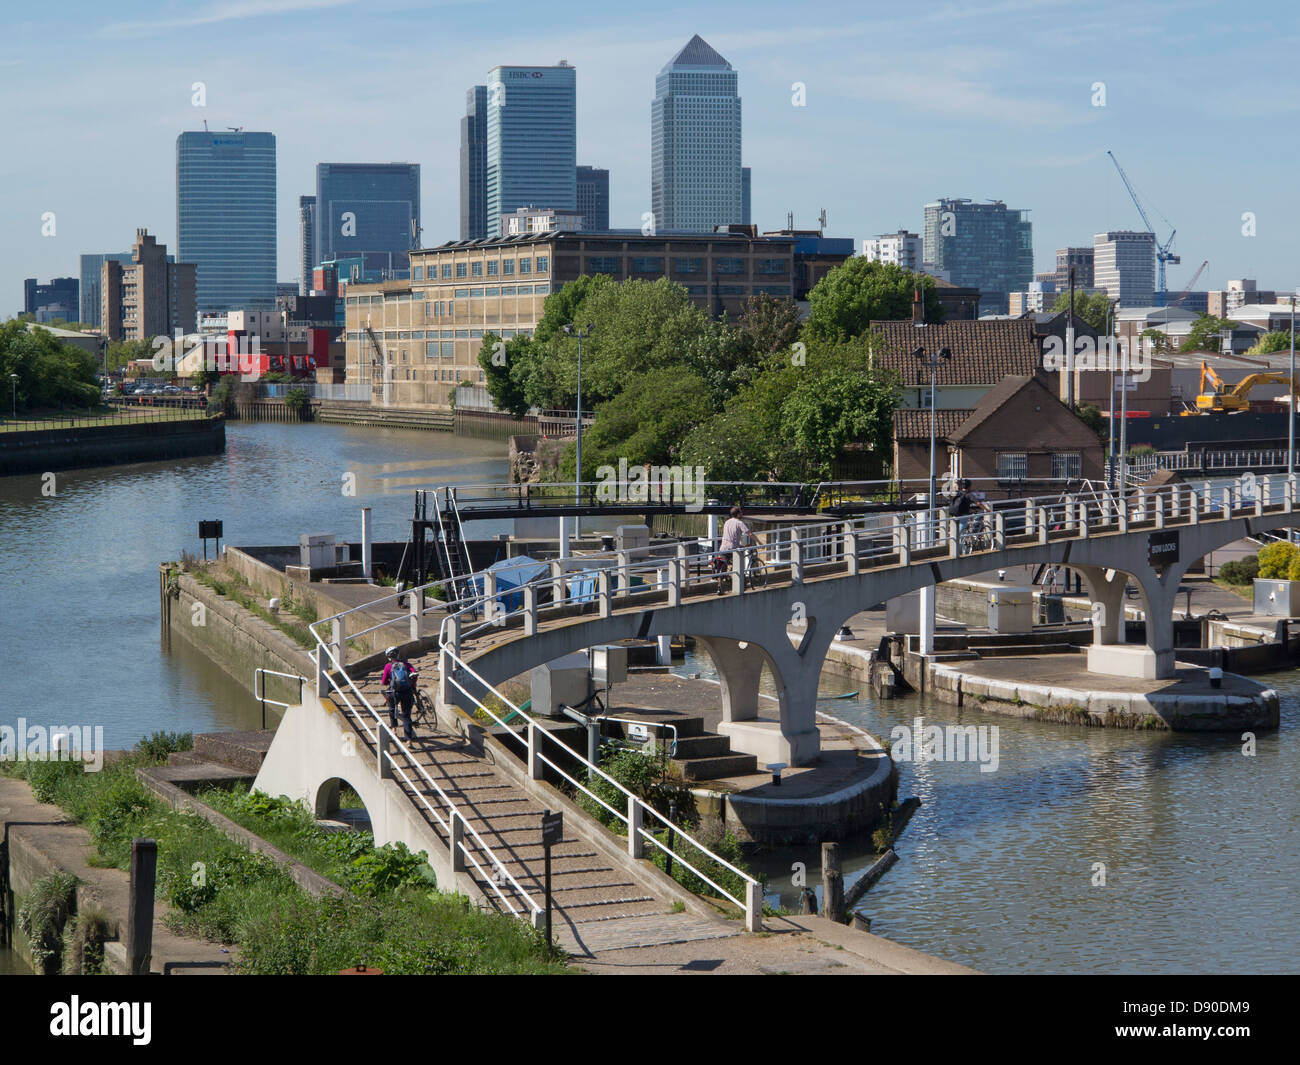 Views of river Lea and the Lea Valley walk with Canary Wharf in the background London, UK Stock Photo